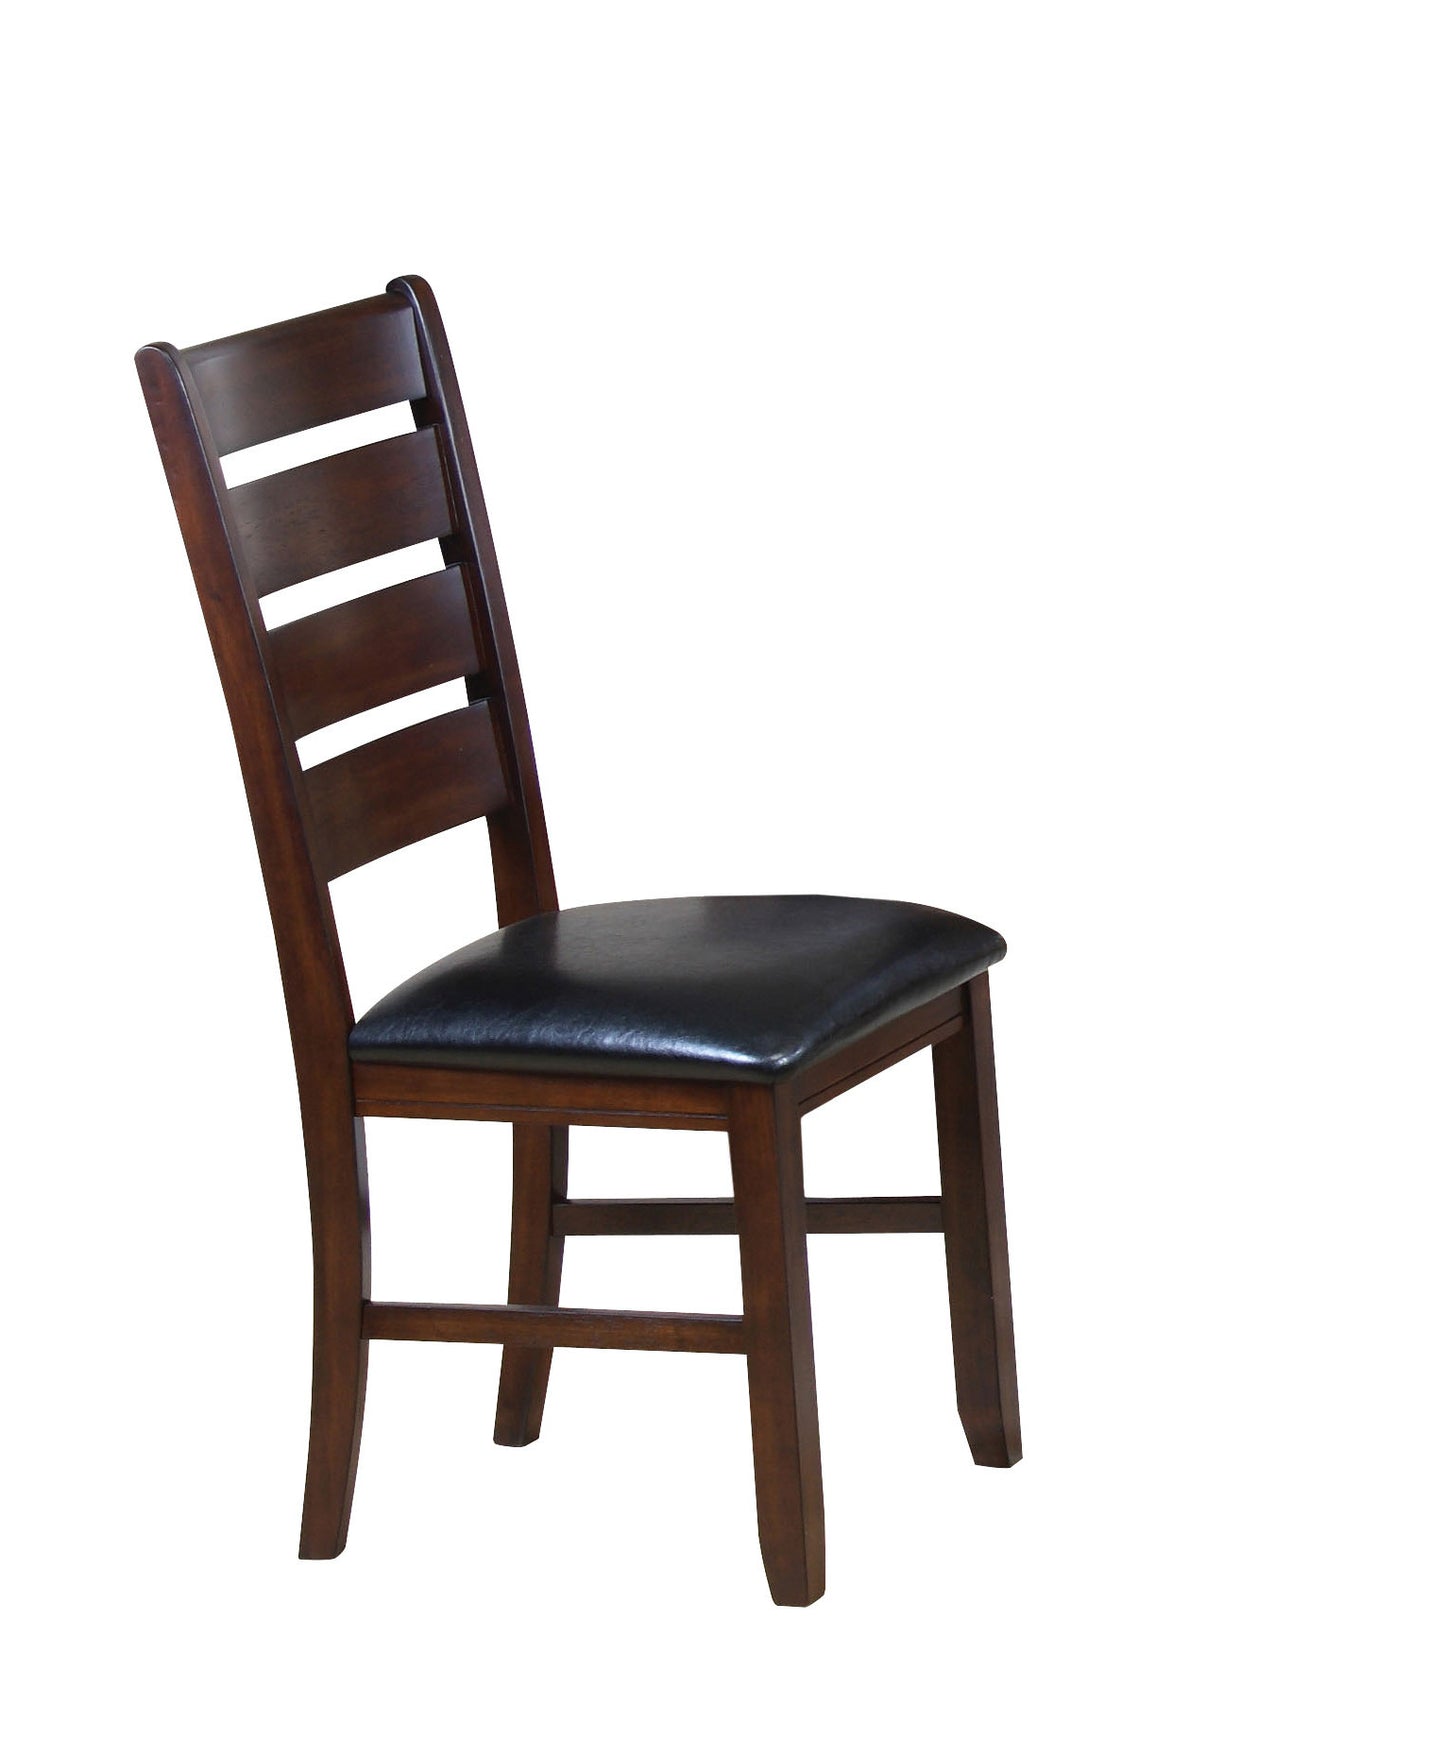 Set of Two Black And Dark Brown Upholstered Faux Leather Slat Back Dining Side Chairs